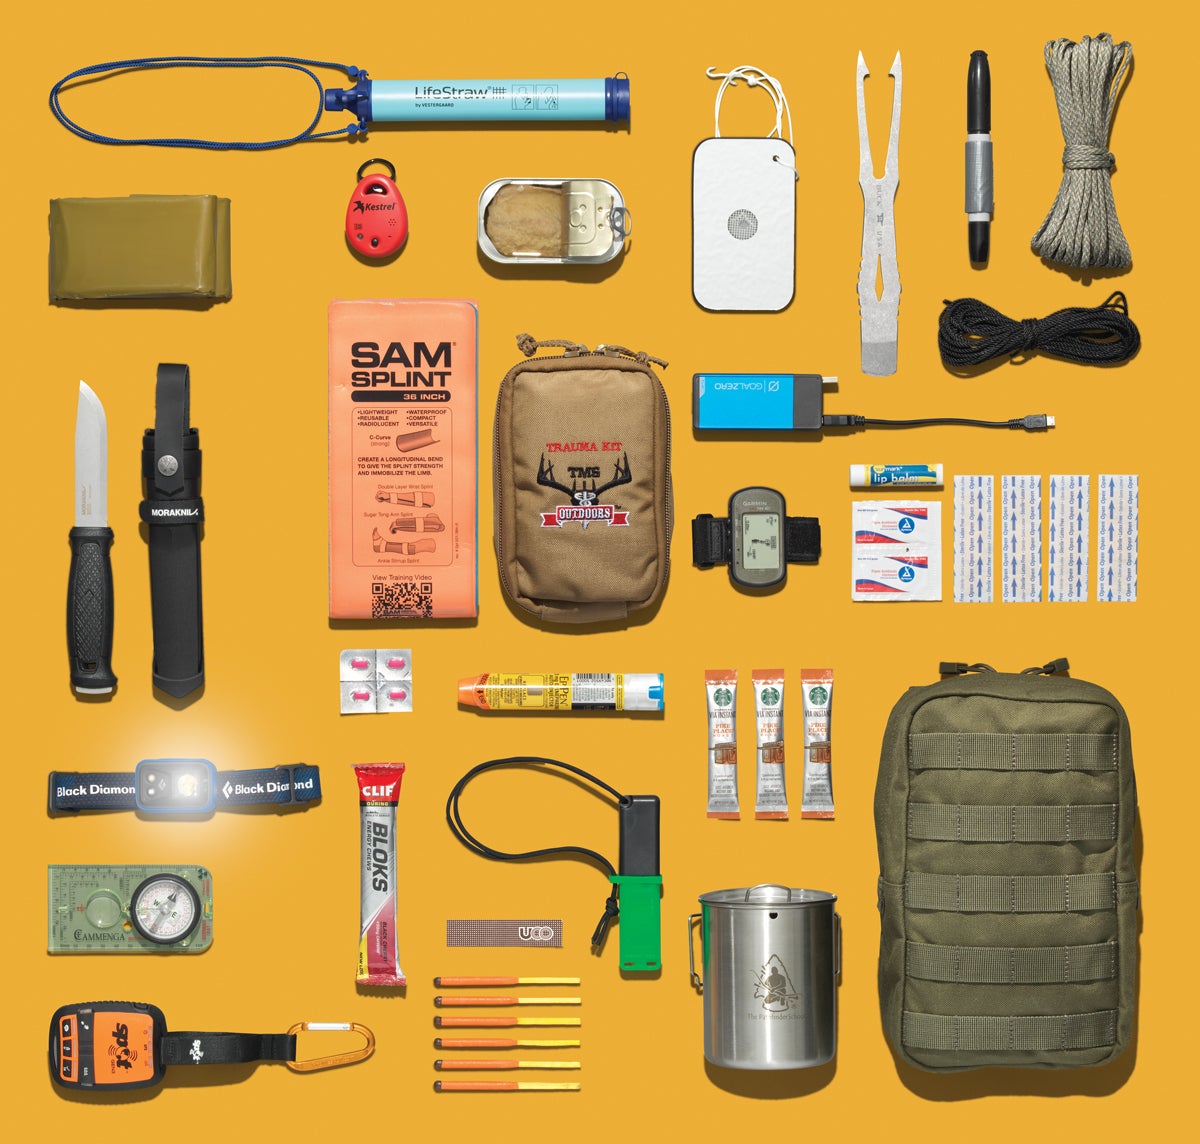  Survival Gear Kit, 21 in 1 Survival Gear and Equipment, Cool  Top Gadgets Christmas Birthday Gifts for Men Dad Him Husband Boyfriend Teen  Boy Camping Fishing Hunting Hiking : Sports & Outdoors